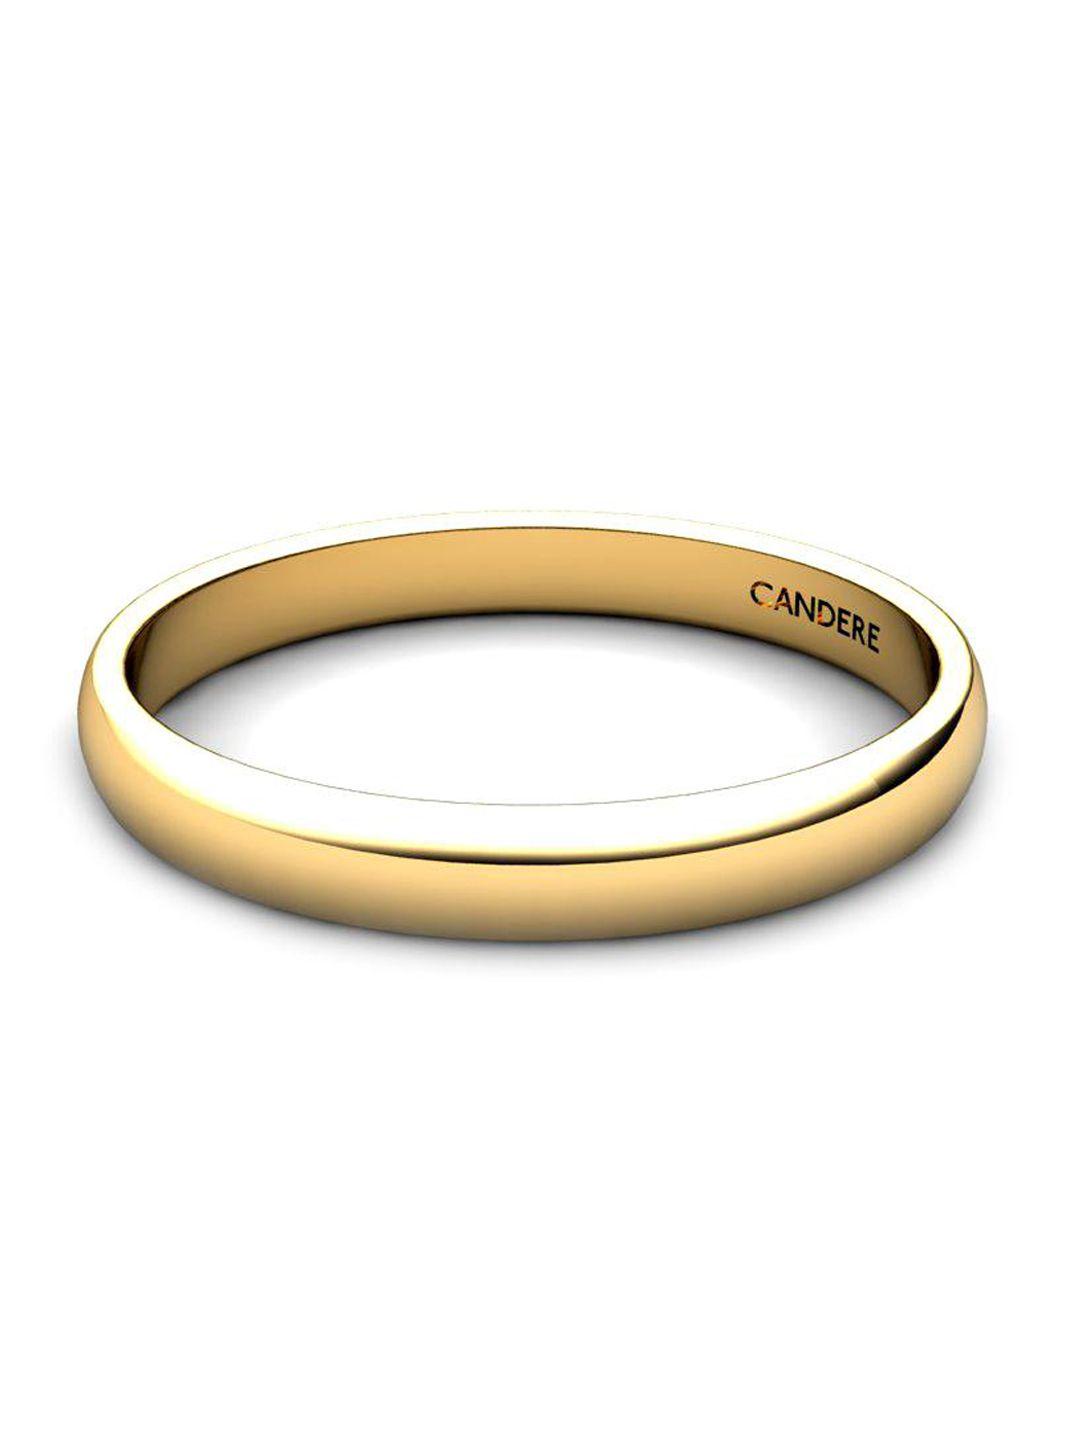 candere-a-kalyan-jewellers-company-18kt-gold-ring-2.95gm